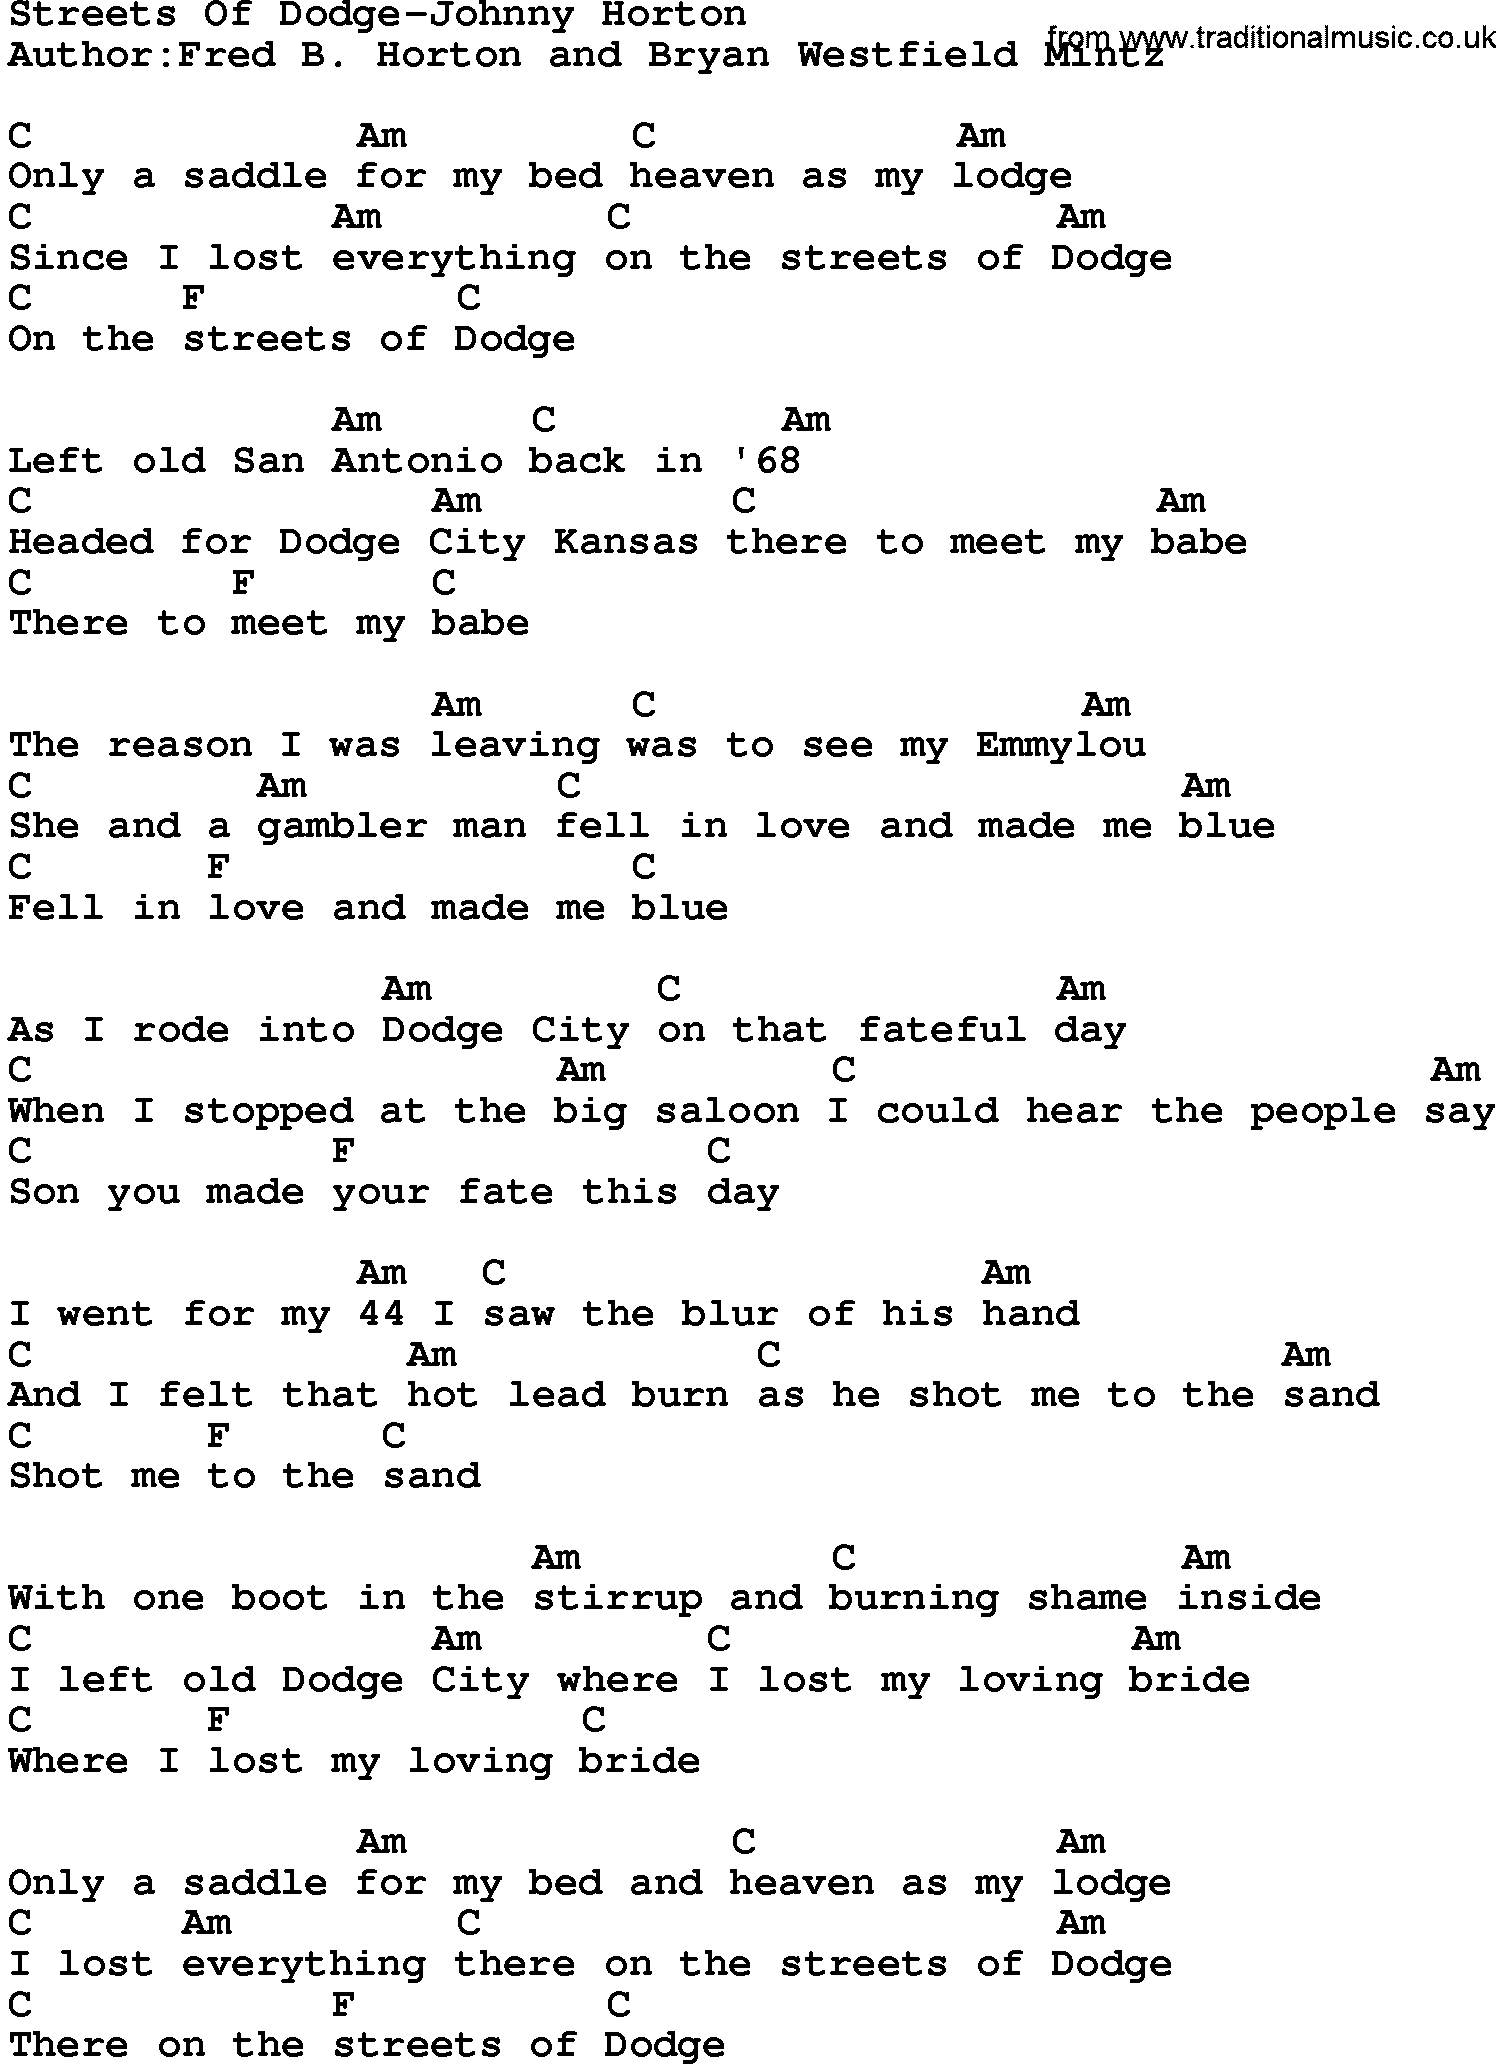 Country music song: Streets Of Dodge-Johnny Horton lyrics and chords